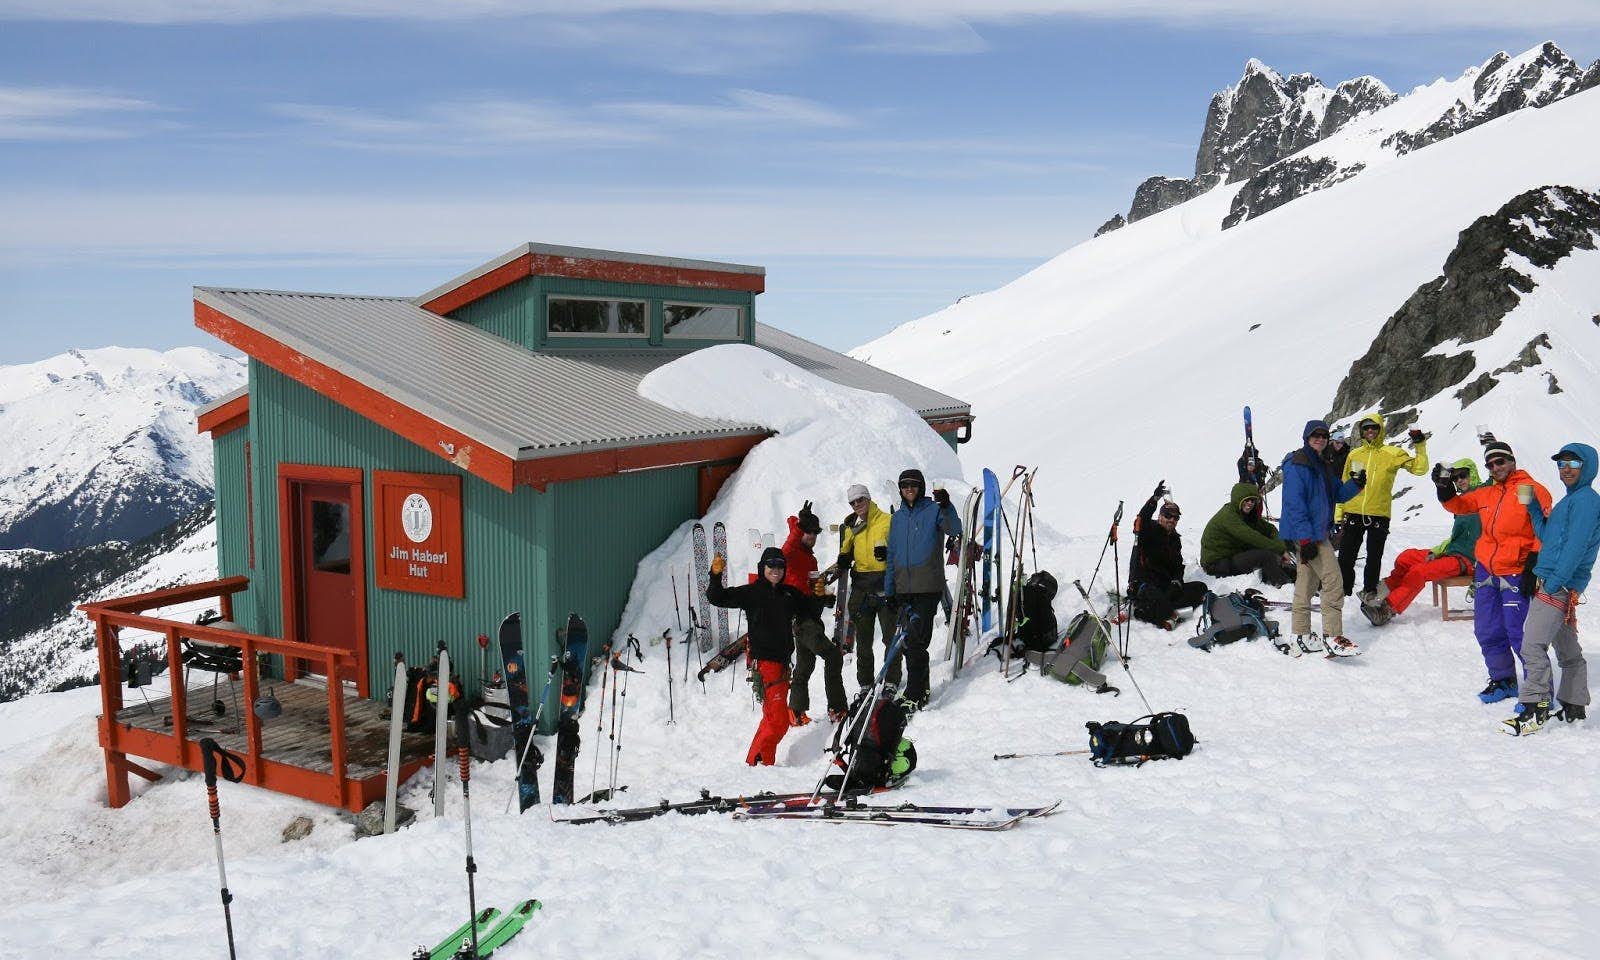 Skiers at the Jim Haberl Hut in BC.